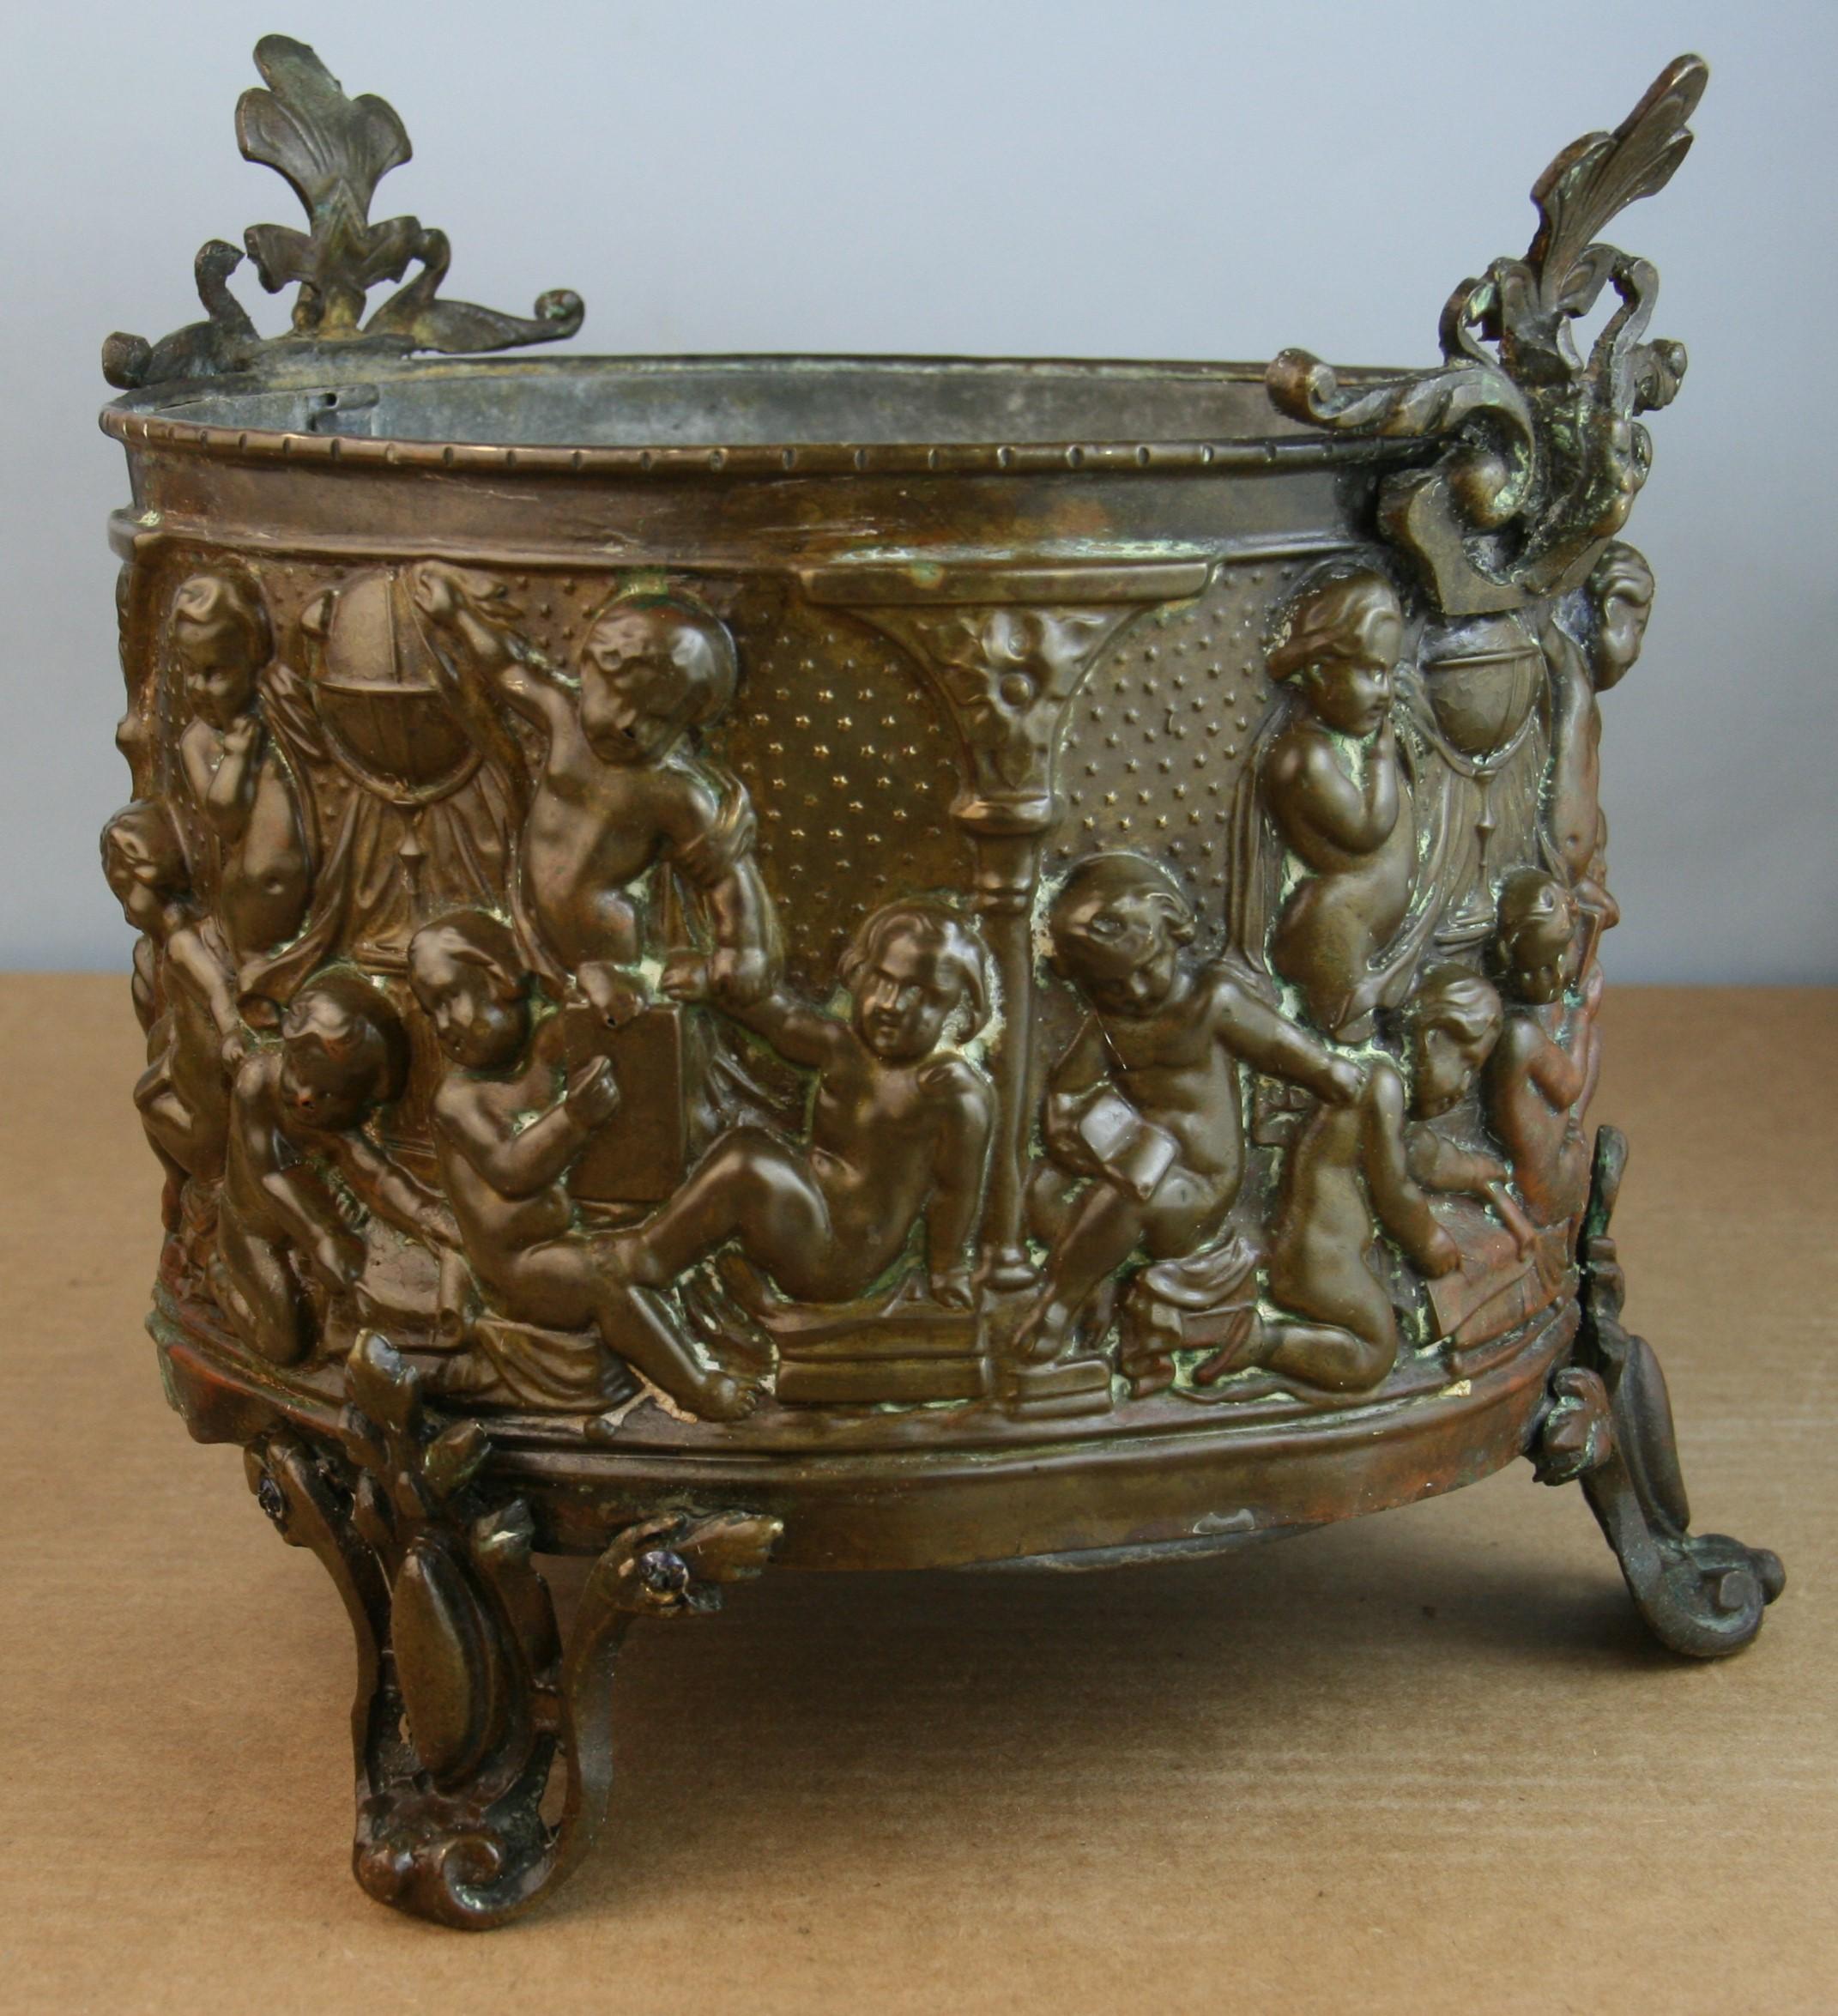 Hand Crafted and highly decorative Renaissance Revival copper planter
The piece has amazing patina and the zinc liner is still inside.
The zinc liner has one hole on the bottom.